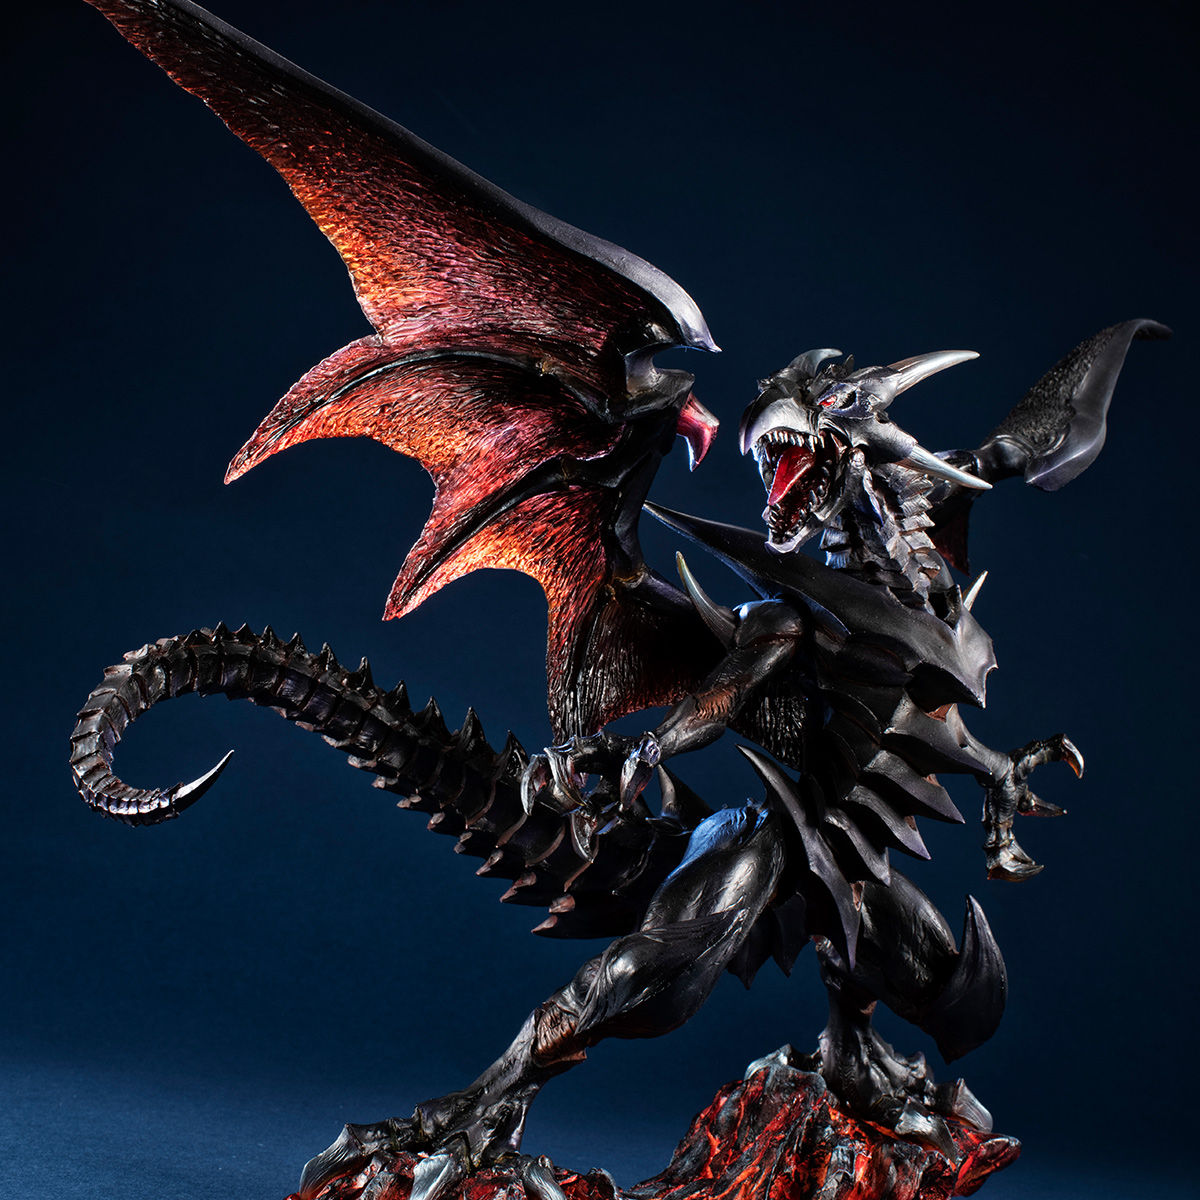 Art Works Monsters 遊 戯 王デュエルモンスターズ 真紅眼の黒竜 遊 戯 王デュエルモンスターズ 趣味 コレクション バンダイナムコグループ公式通販サイト